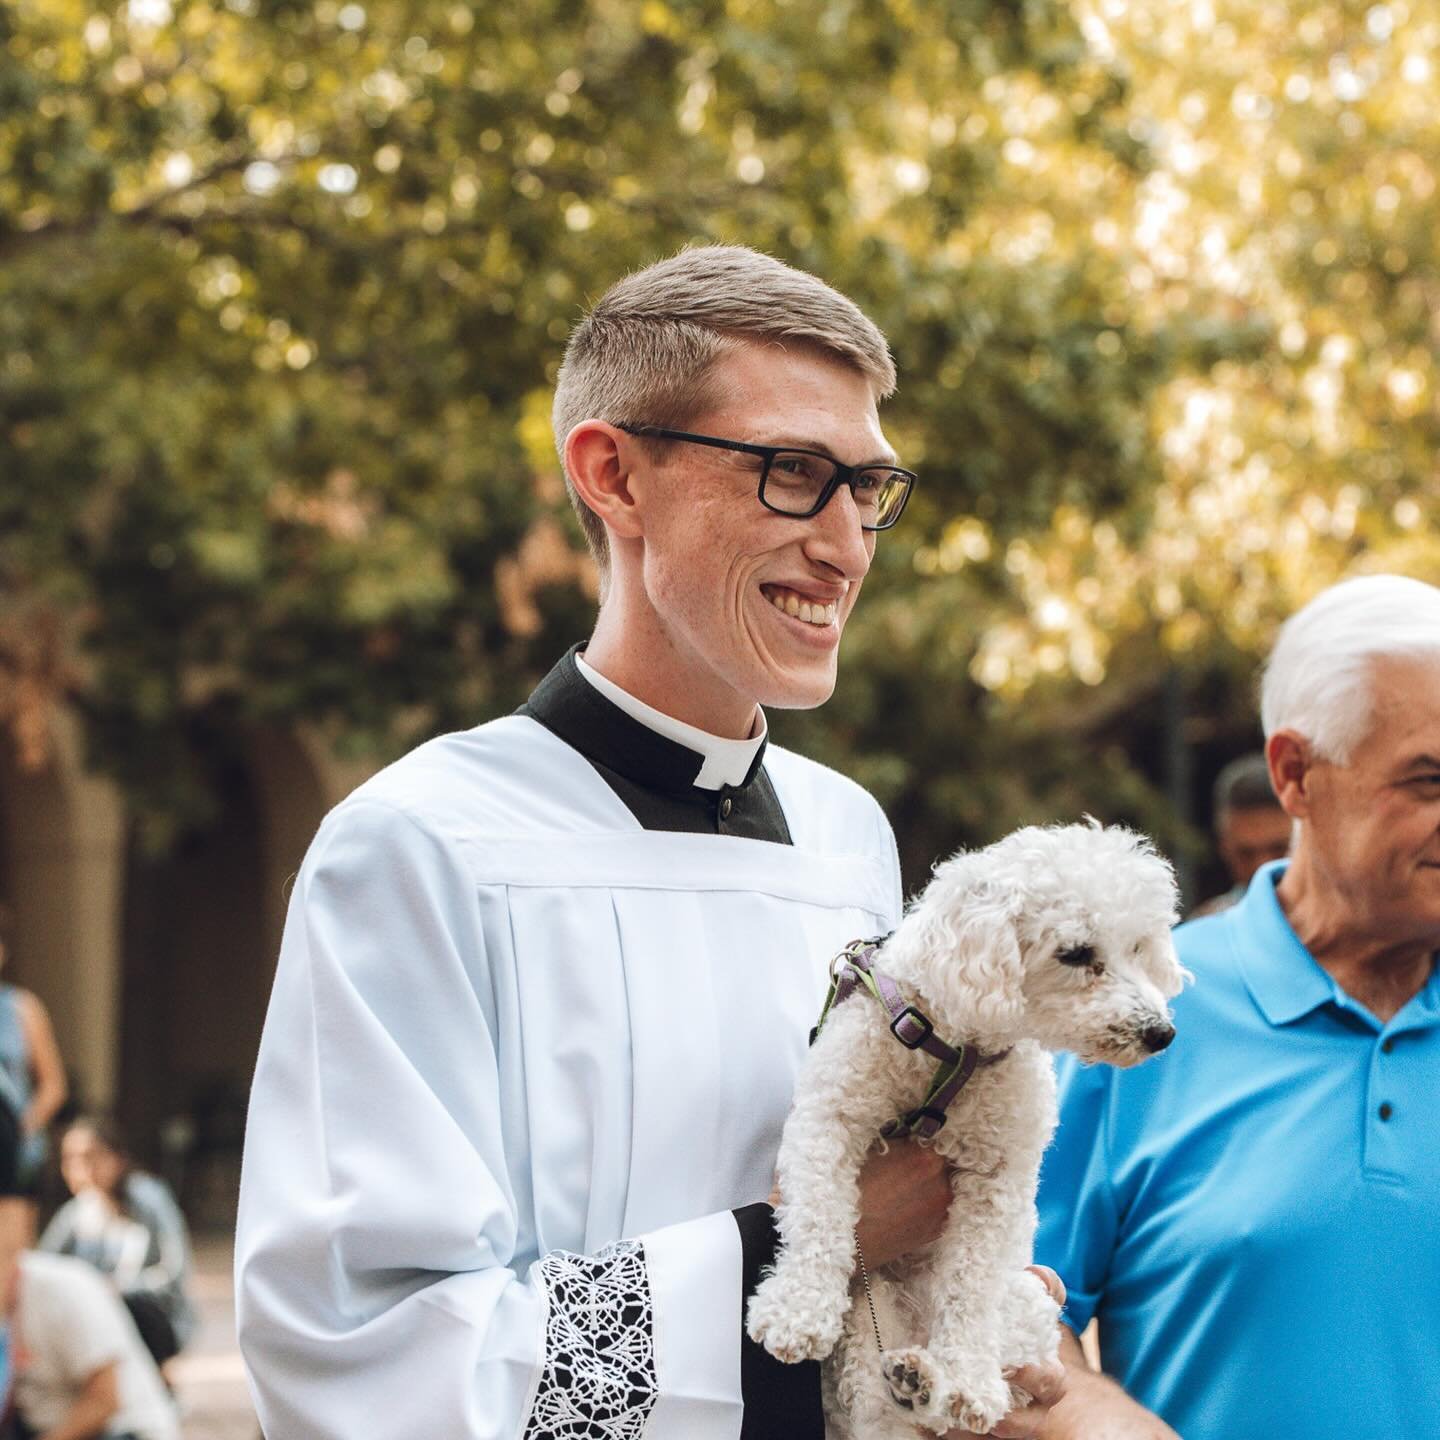 PODCAST | This morning, you will find a special podcast episode about our Pastoral Seminarian, Nick Weiss, who has spent the last year serving our community and shadowing our priests as he continues his walk toward priesthood! We will say farewell to